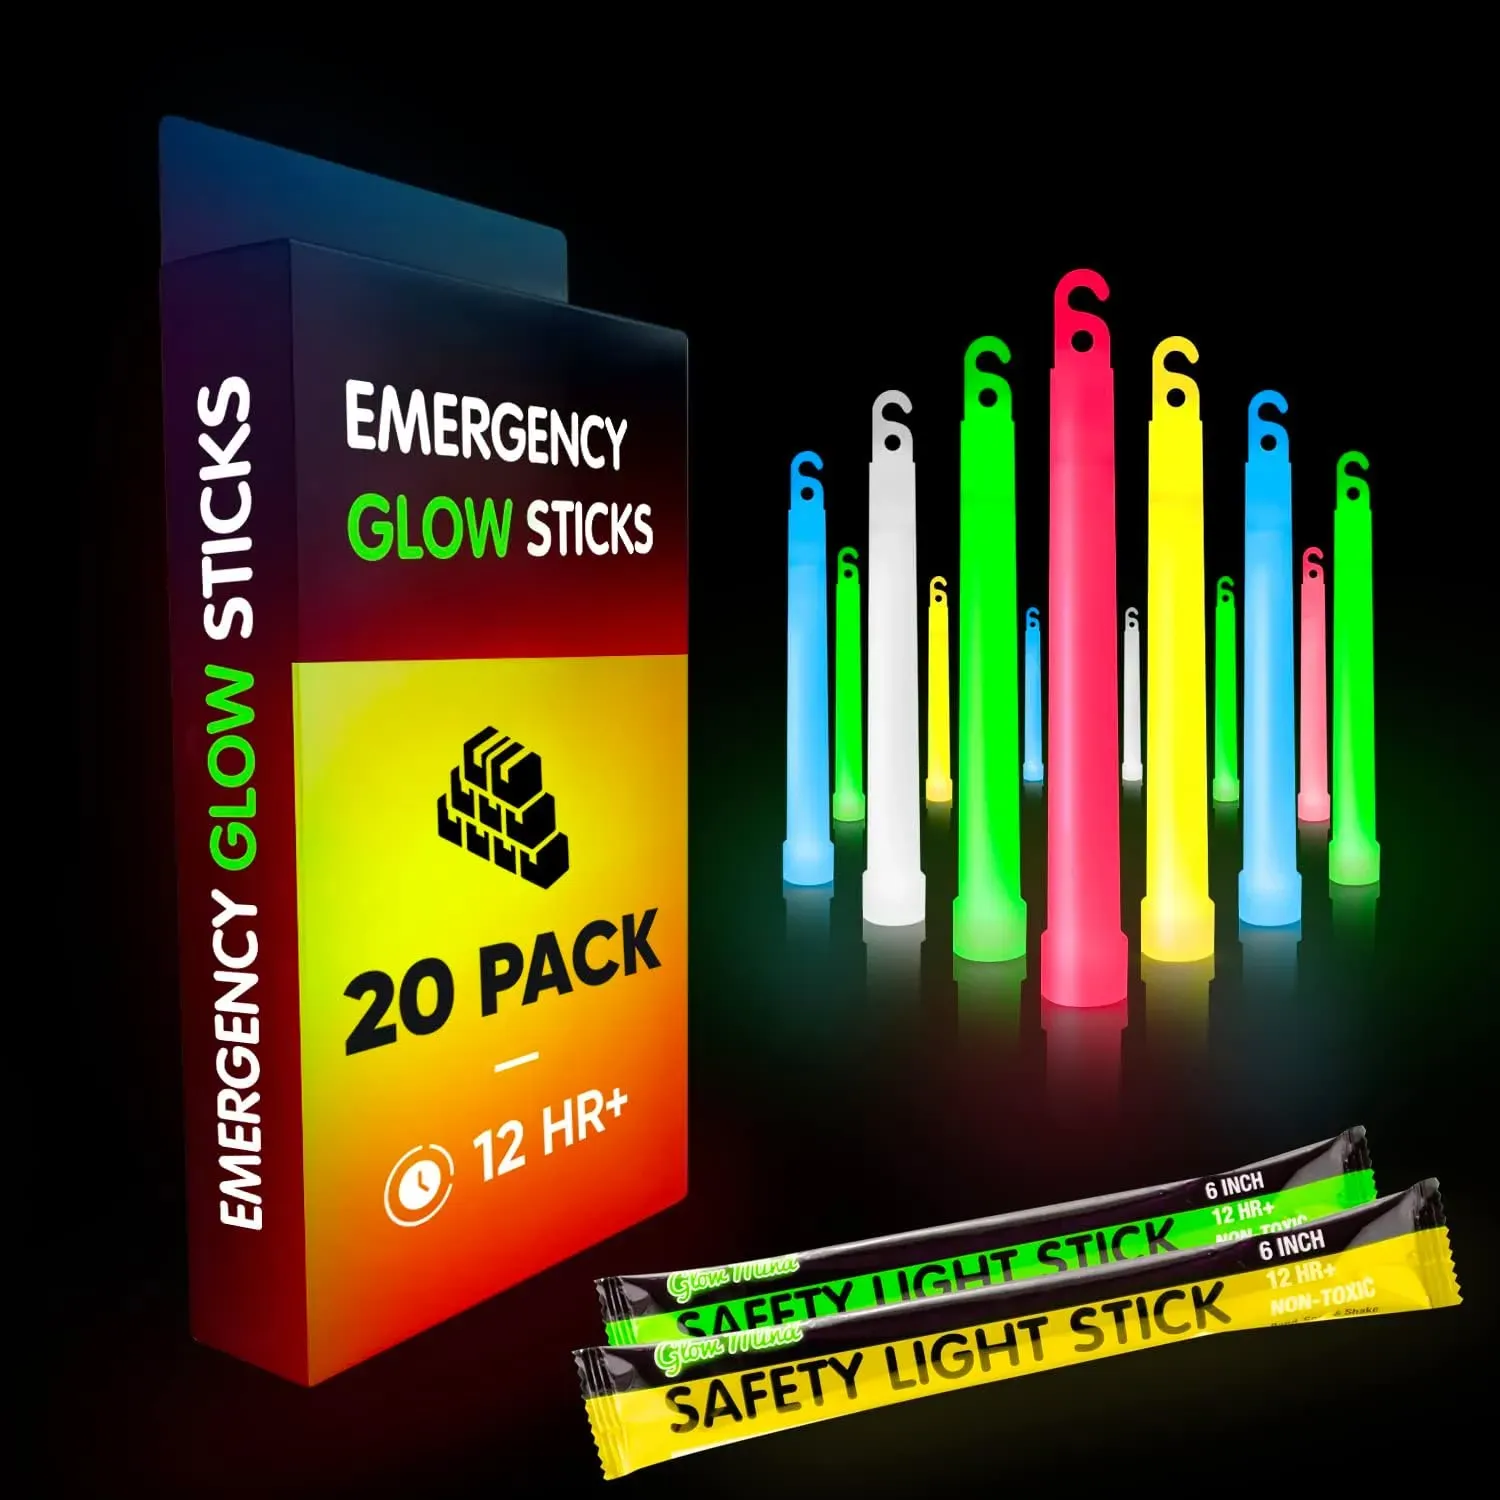 Emergency Glow Sticks with 12 Hours Duration, Individually Wrapped Industrial Grade Glowsticks for Survival Gear, Camping Lights, Power Outages and Military Use